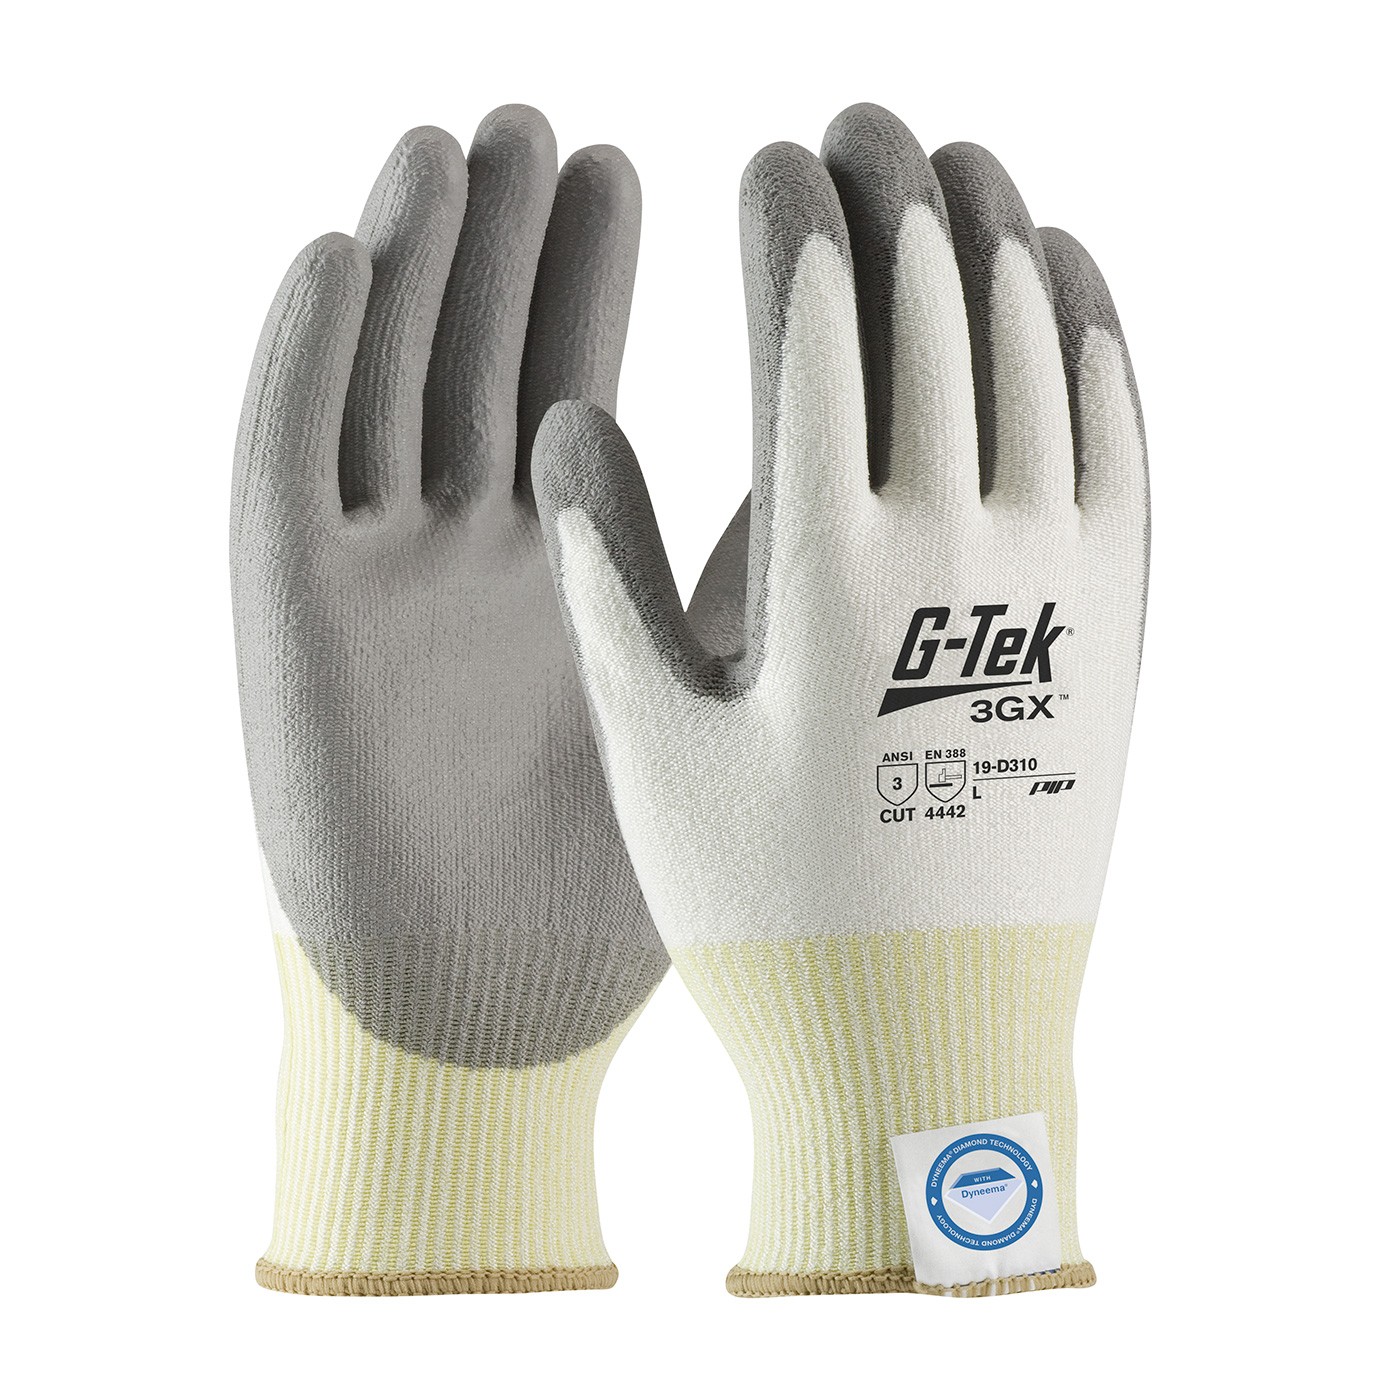 G-Tek® 3GX® Seamless Knit Dyneema® Diamond Blended Glove with Polyurethane Coated Smooth Grip on Palm & Fingers  (#19-D310)